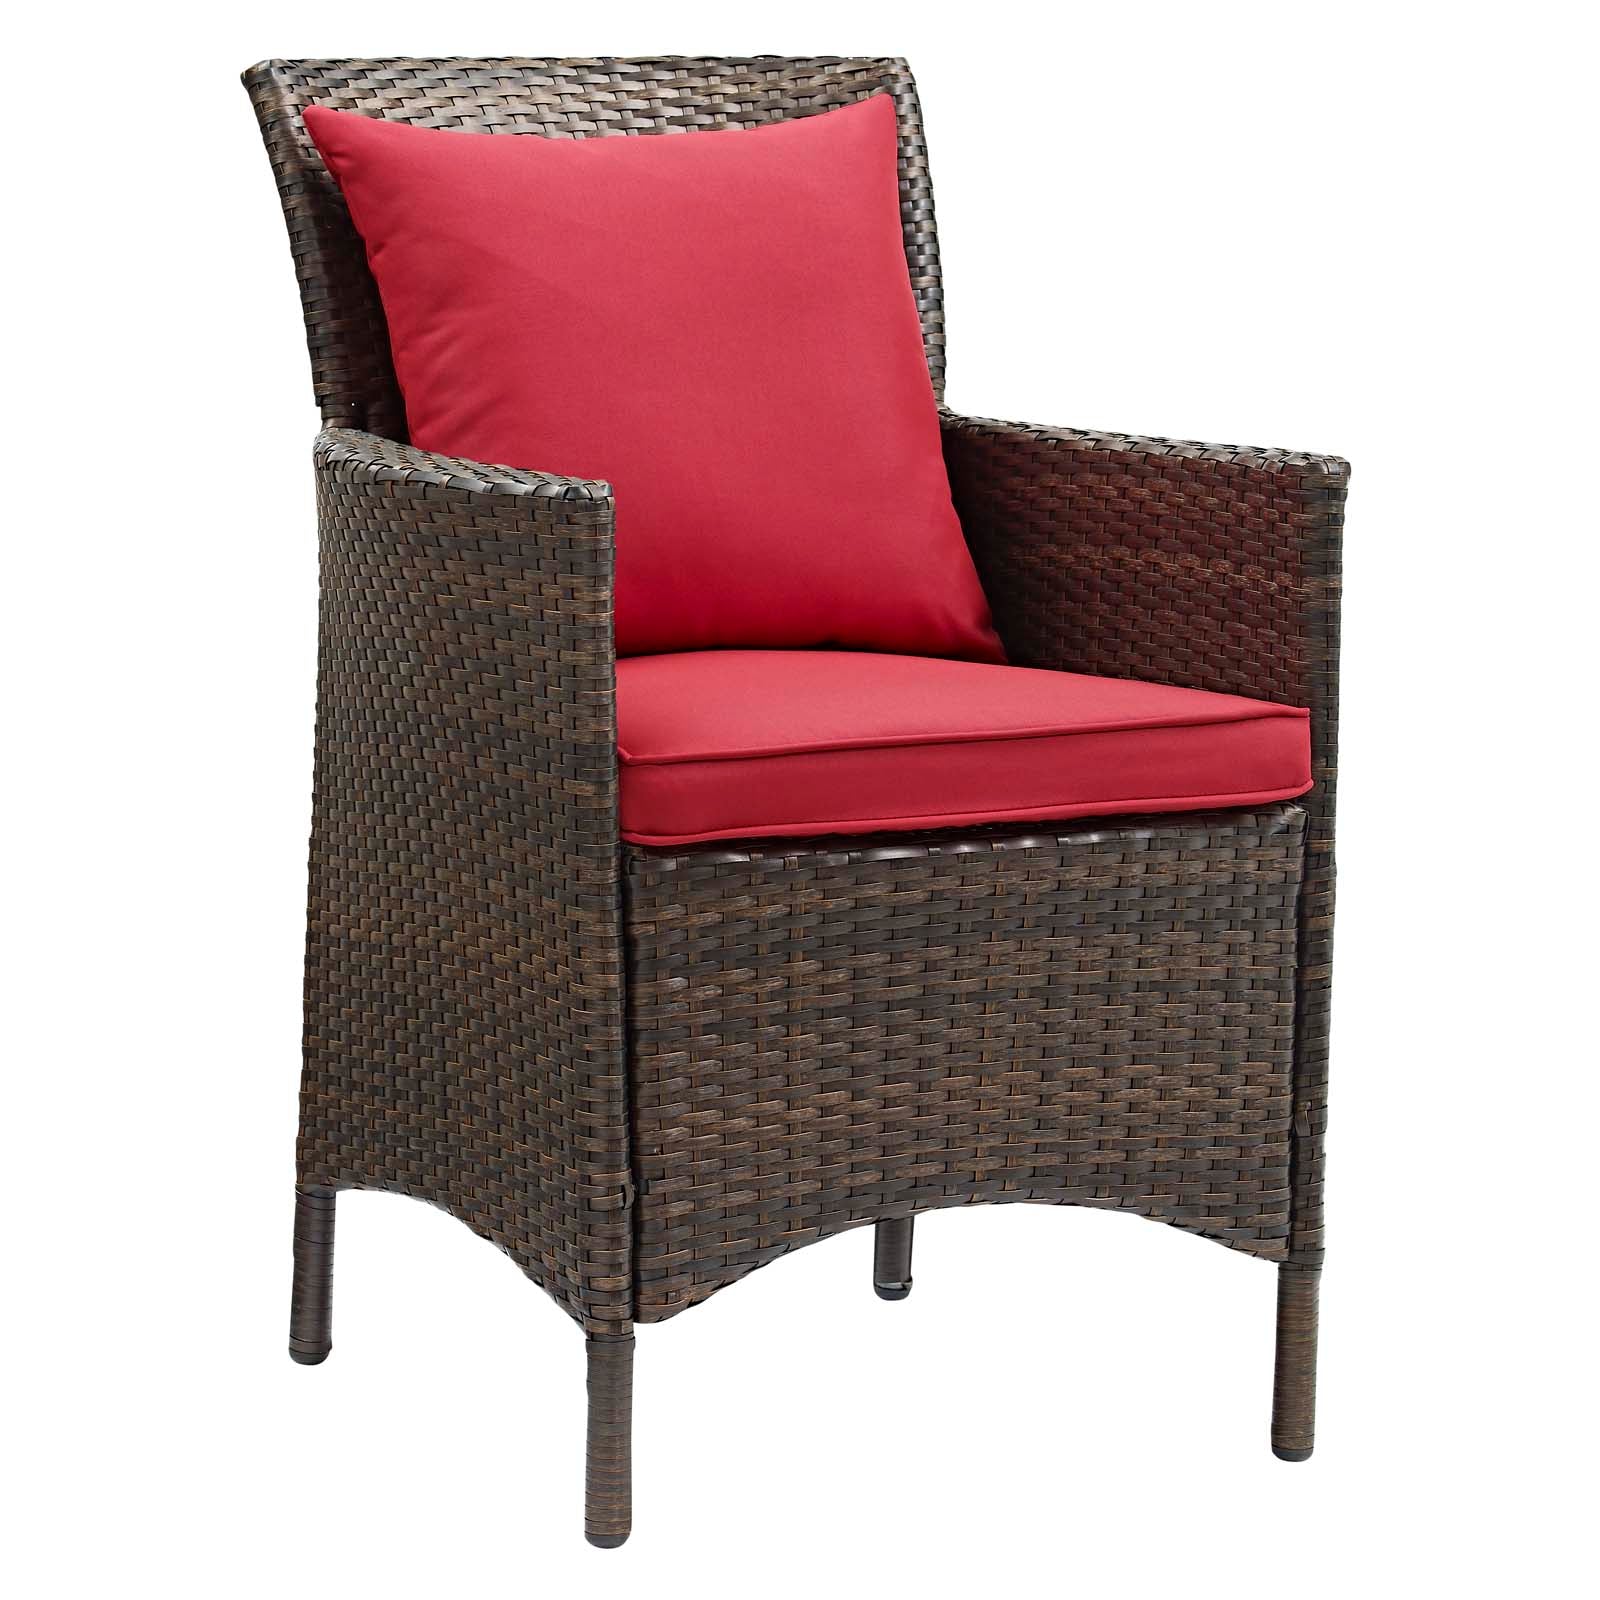 Modway Outdoor Dining Chairs - Conduit Outdoor Patio Wicker Rattan Dining Armchair Set of 2 Brown Red